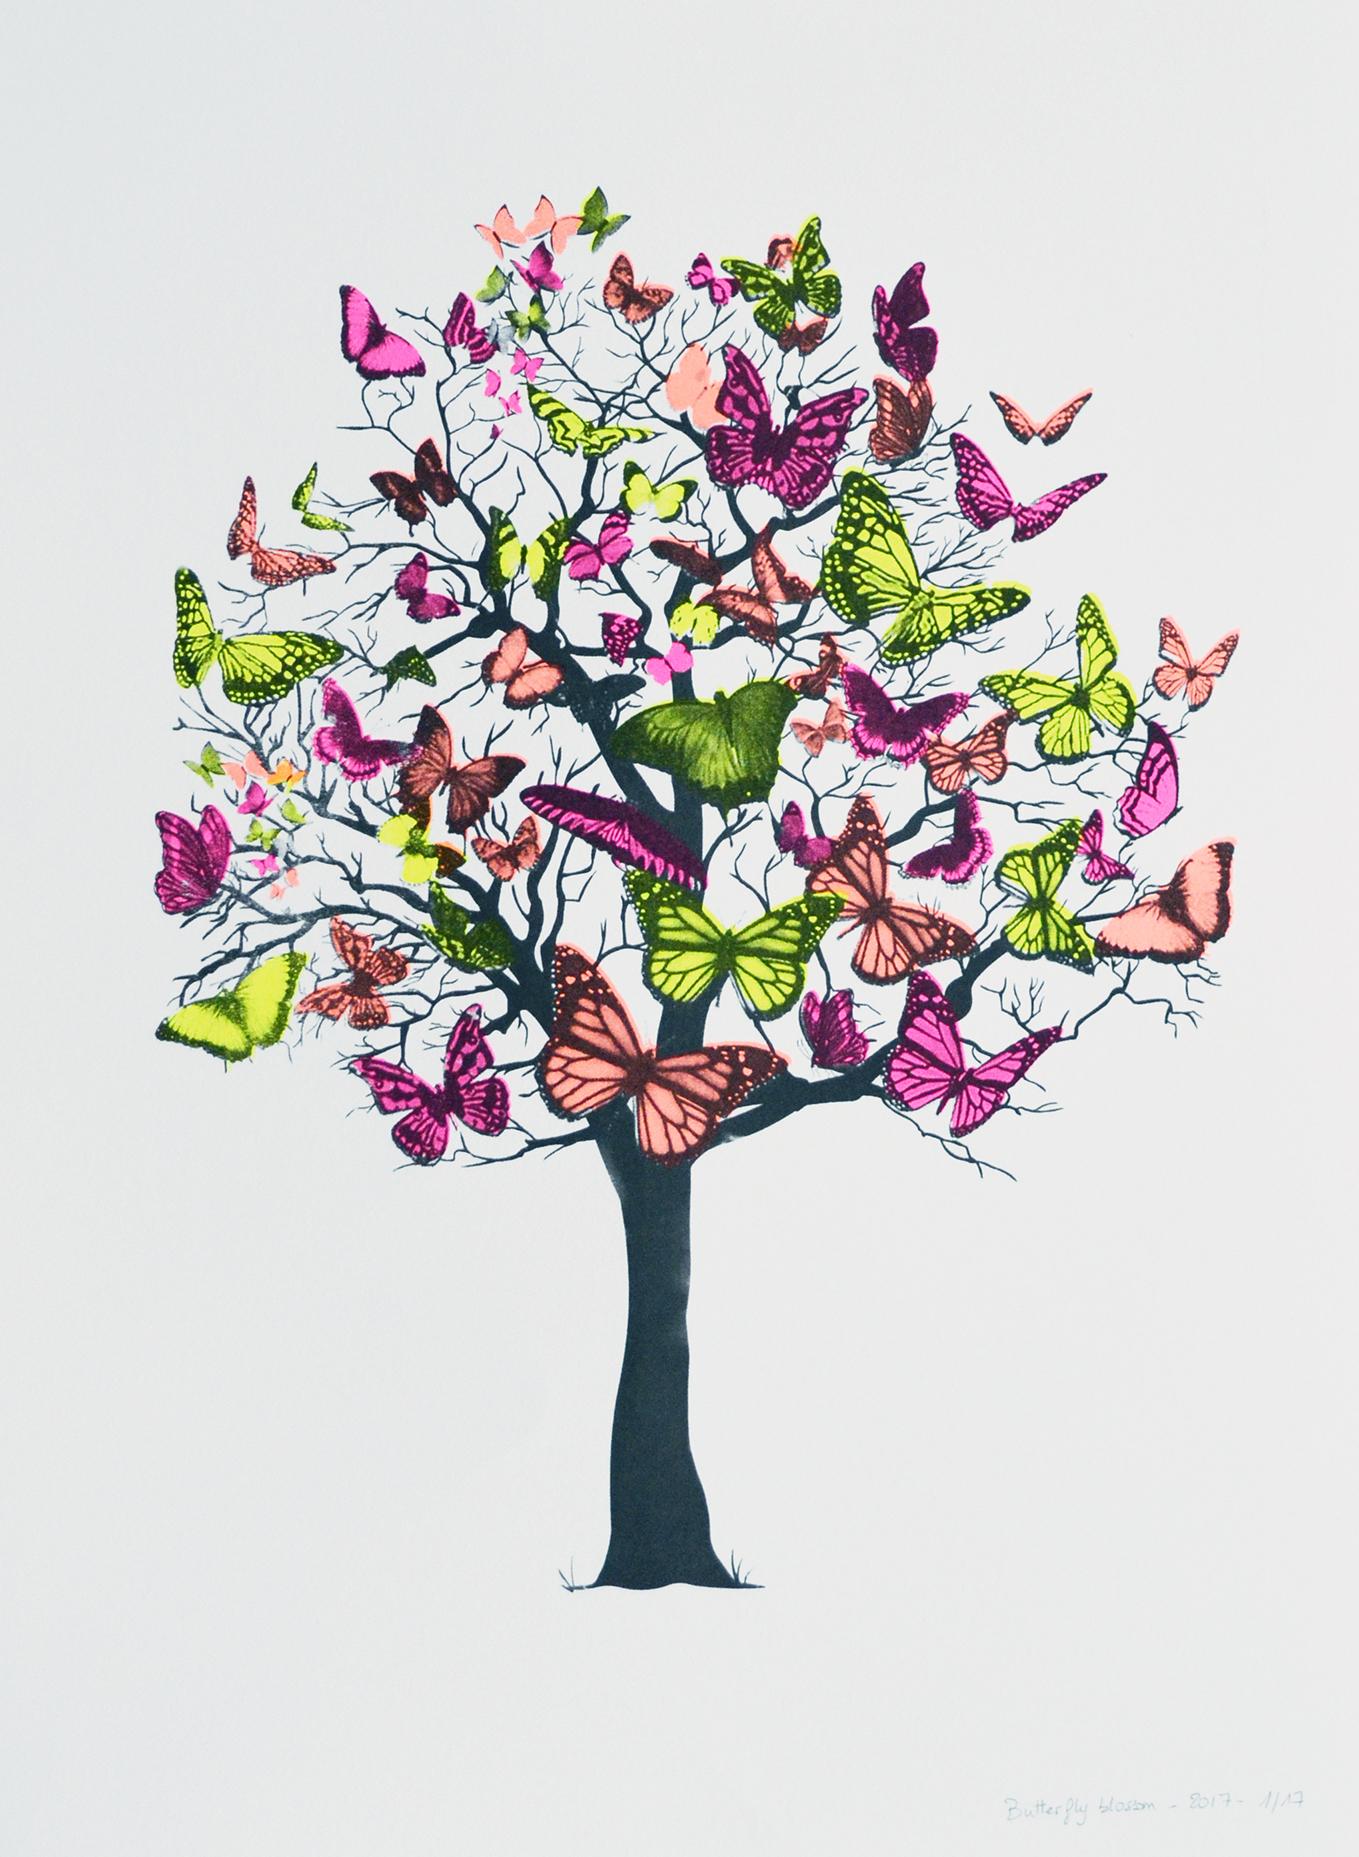 Butterfly Blossom, Anne Storno, Limited edition print, Contemporary art